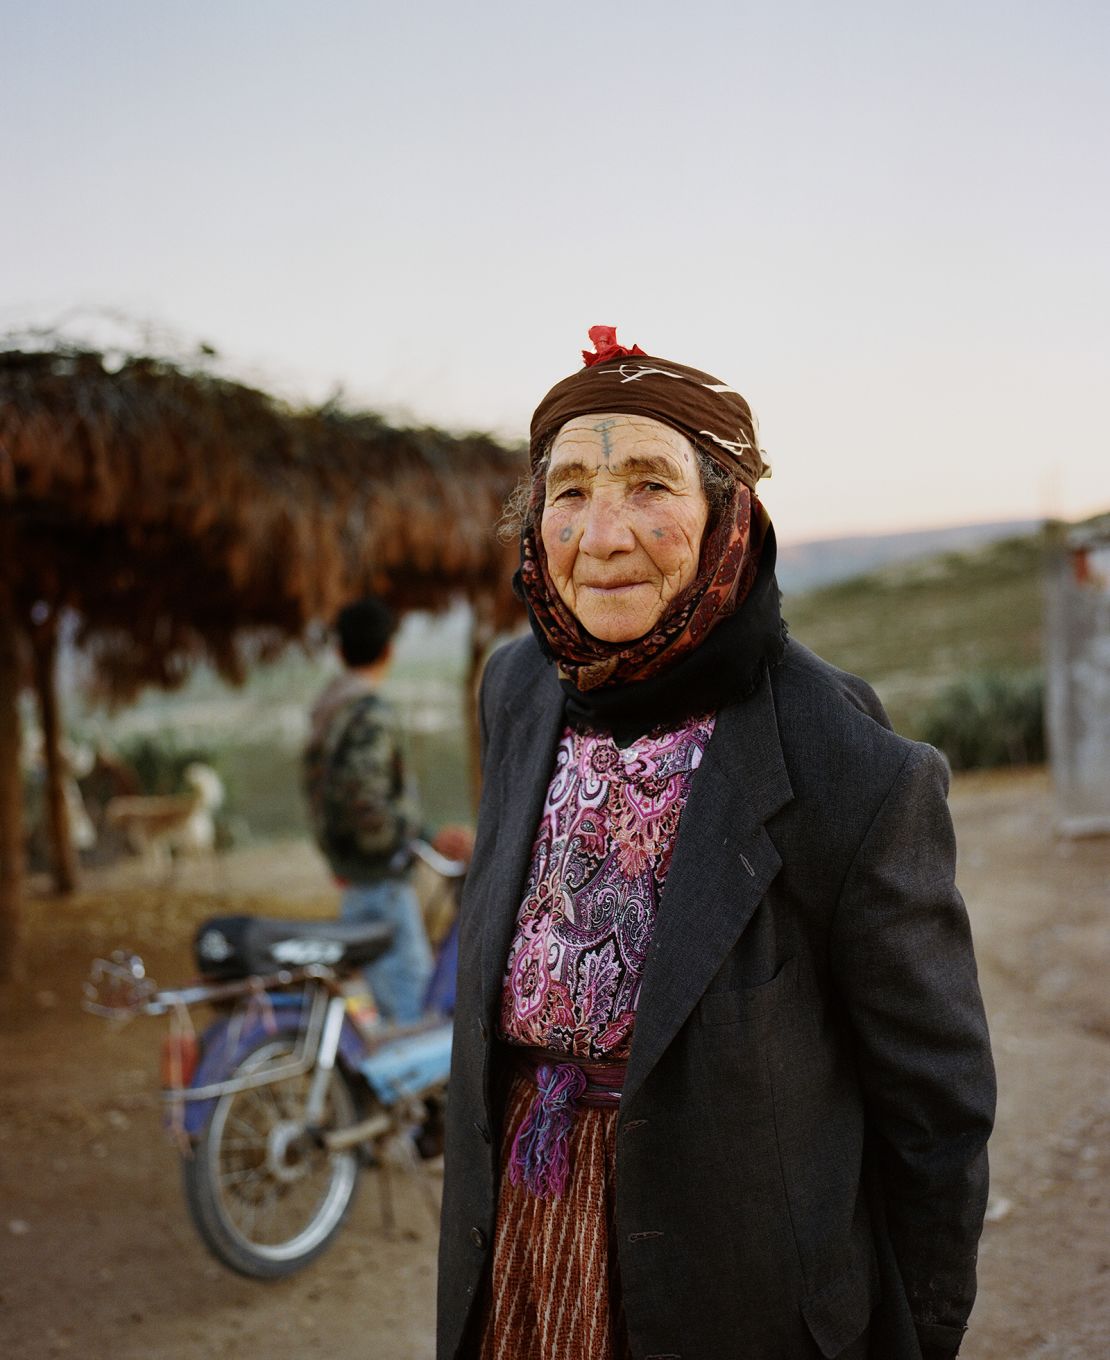 "I have the stars and the moon on my cheeks," Brika told Al-Arashi in Siliana, Tunisia. "They're the most beautiful things my eyes have seen. I don't know how to read or write and I don't have any devices like you, but I know my land and my earth, the stars and moon help me navigate it. That's why I'm here." 